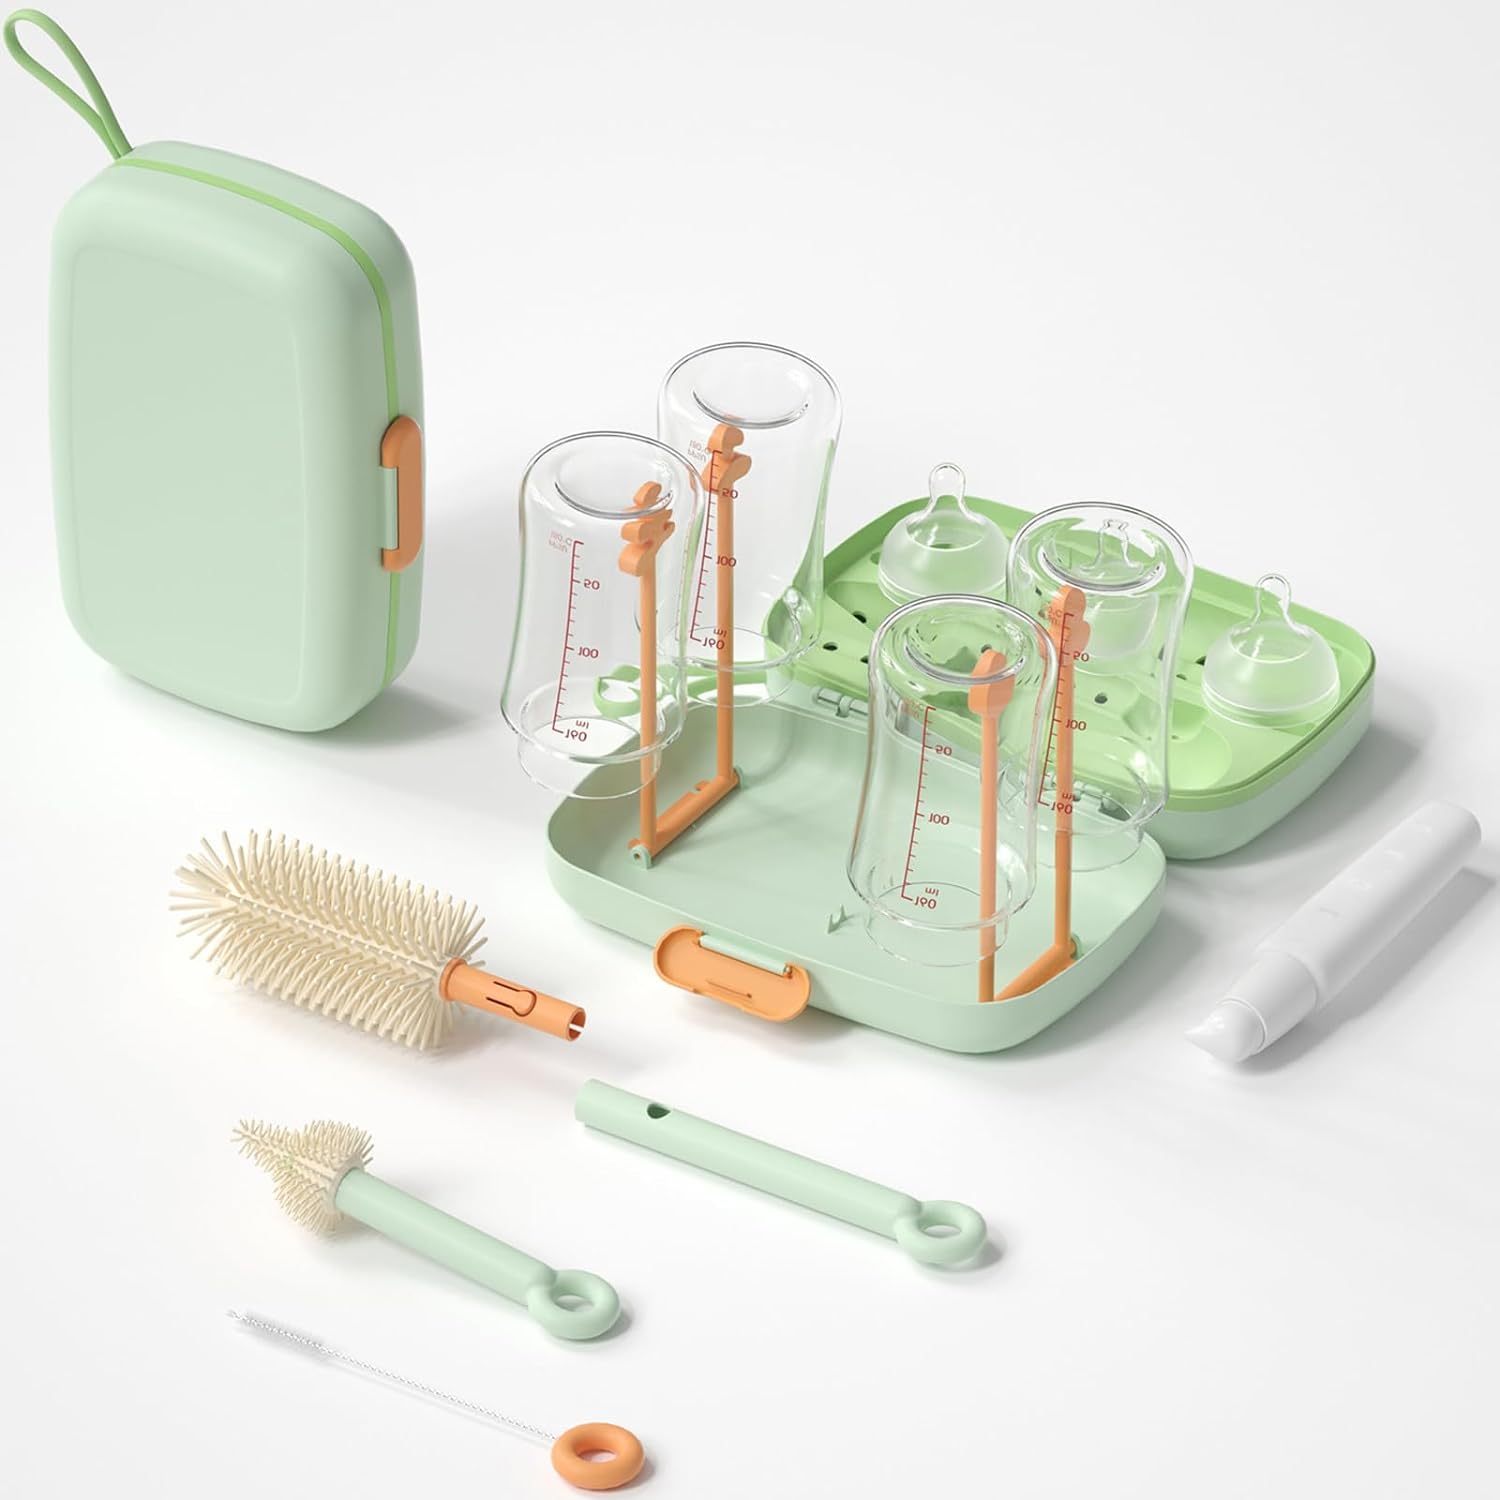 7in1 Travel Bottle Cleaner kit,Baby Essentials, with Bottle Brush、Nipple Brush、Straw Cleaner Brush、Soap Dispenser、Bottle Drying Rack、Drainage Tray、Storage Box,Baby Travel Essential (Green)